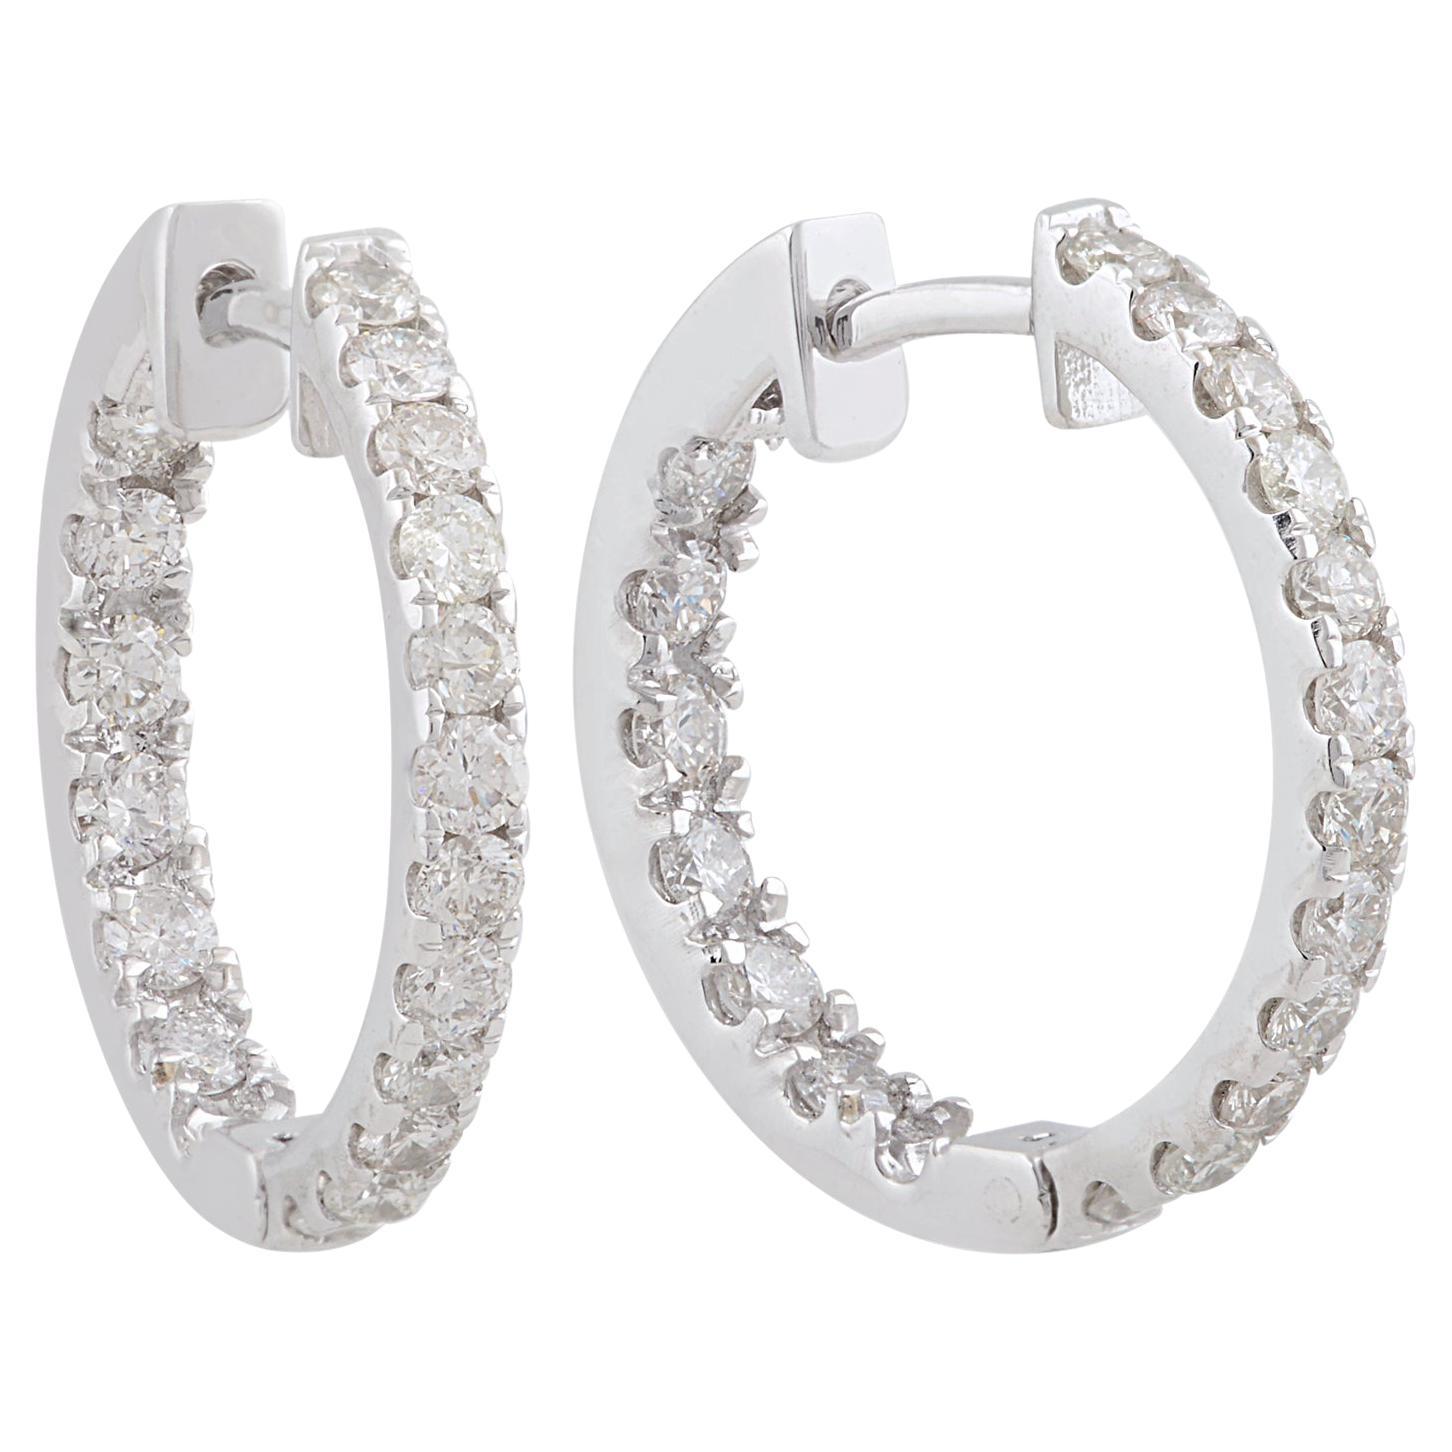 1.15 Carat SI Clarity HI Color Diamond Pave Hoop Earrings 10k White Gold Jewelry